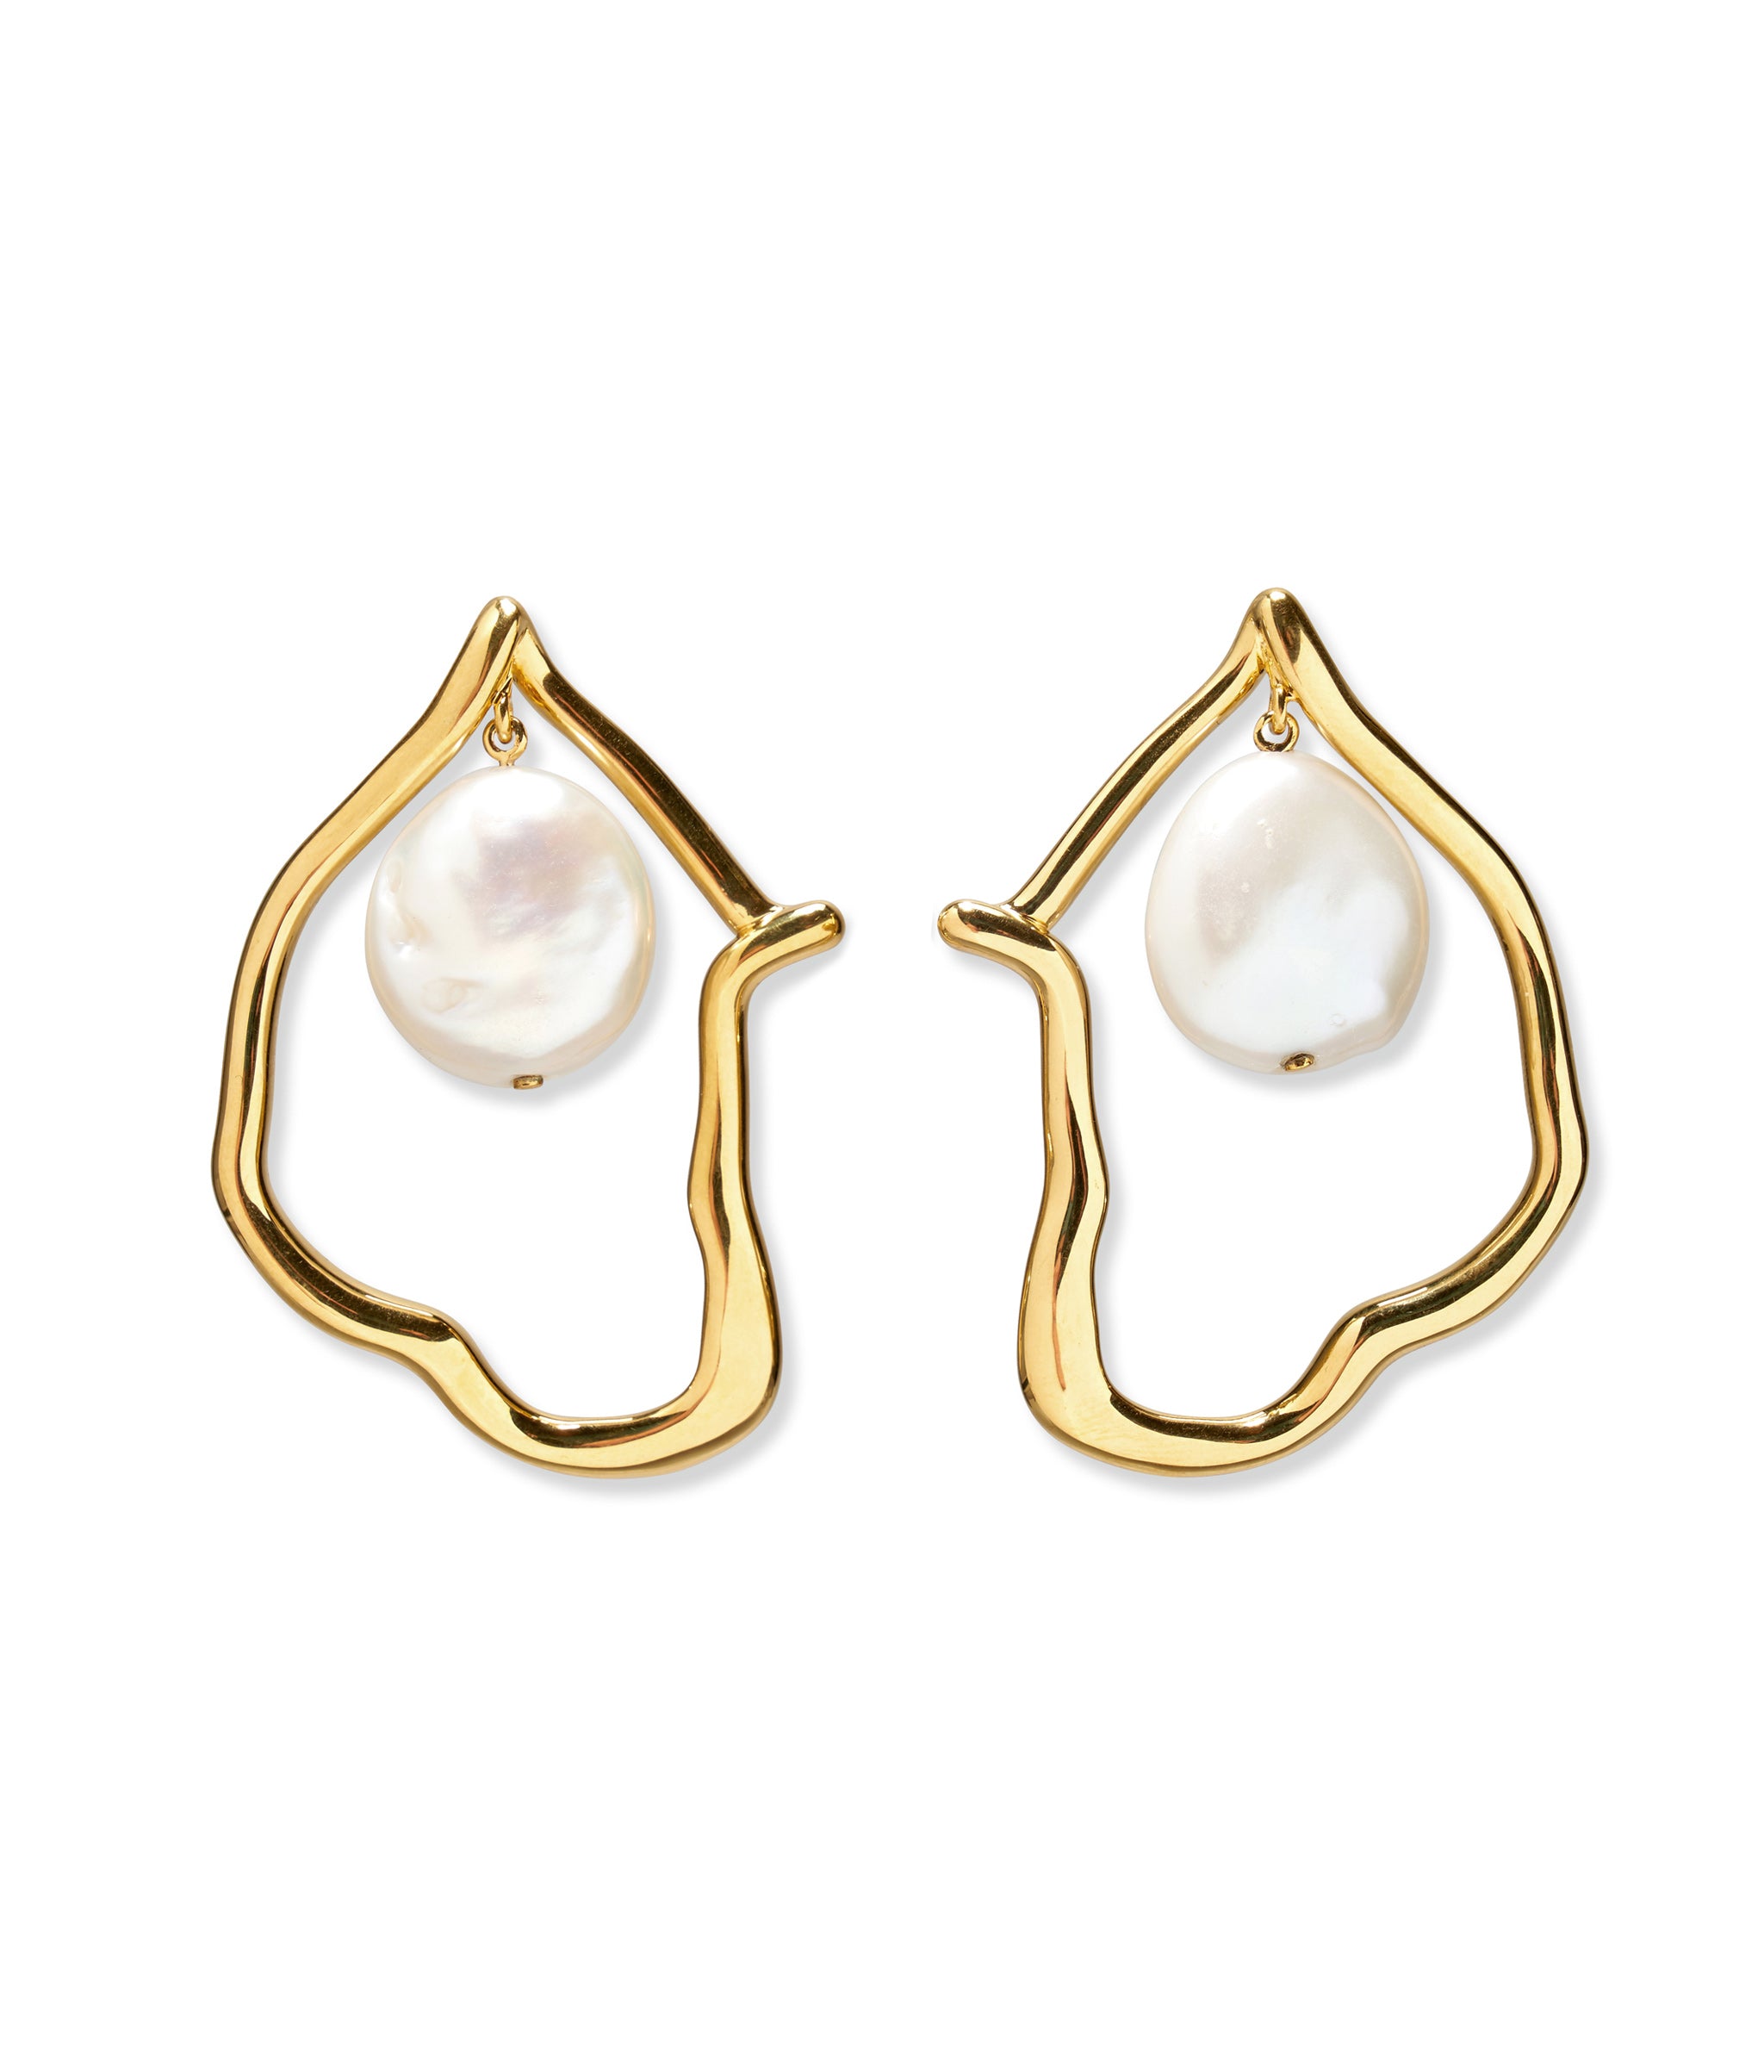 Formation Earrings in Pearl. Gold-plated brass abstract shape earrings with hanging freshwater pearl drops.